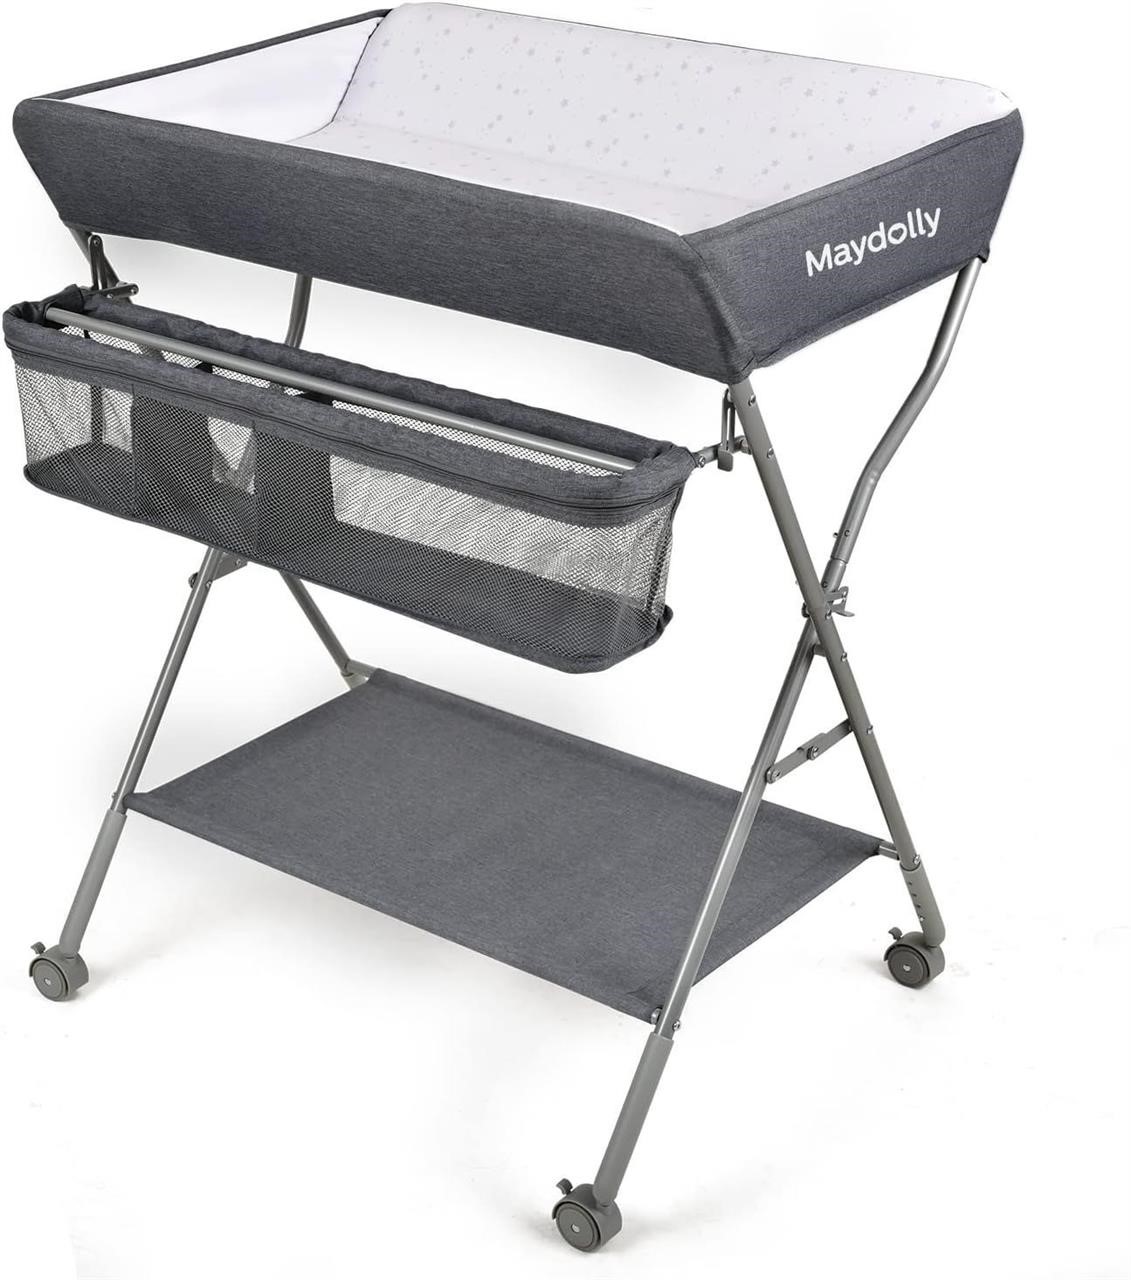 NEW $120 Maydolly Diaper Changing Table